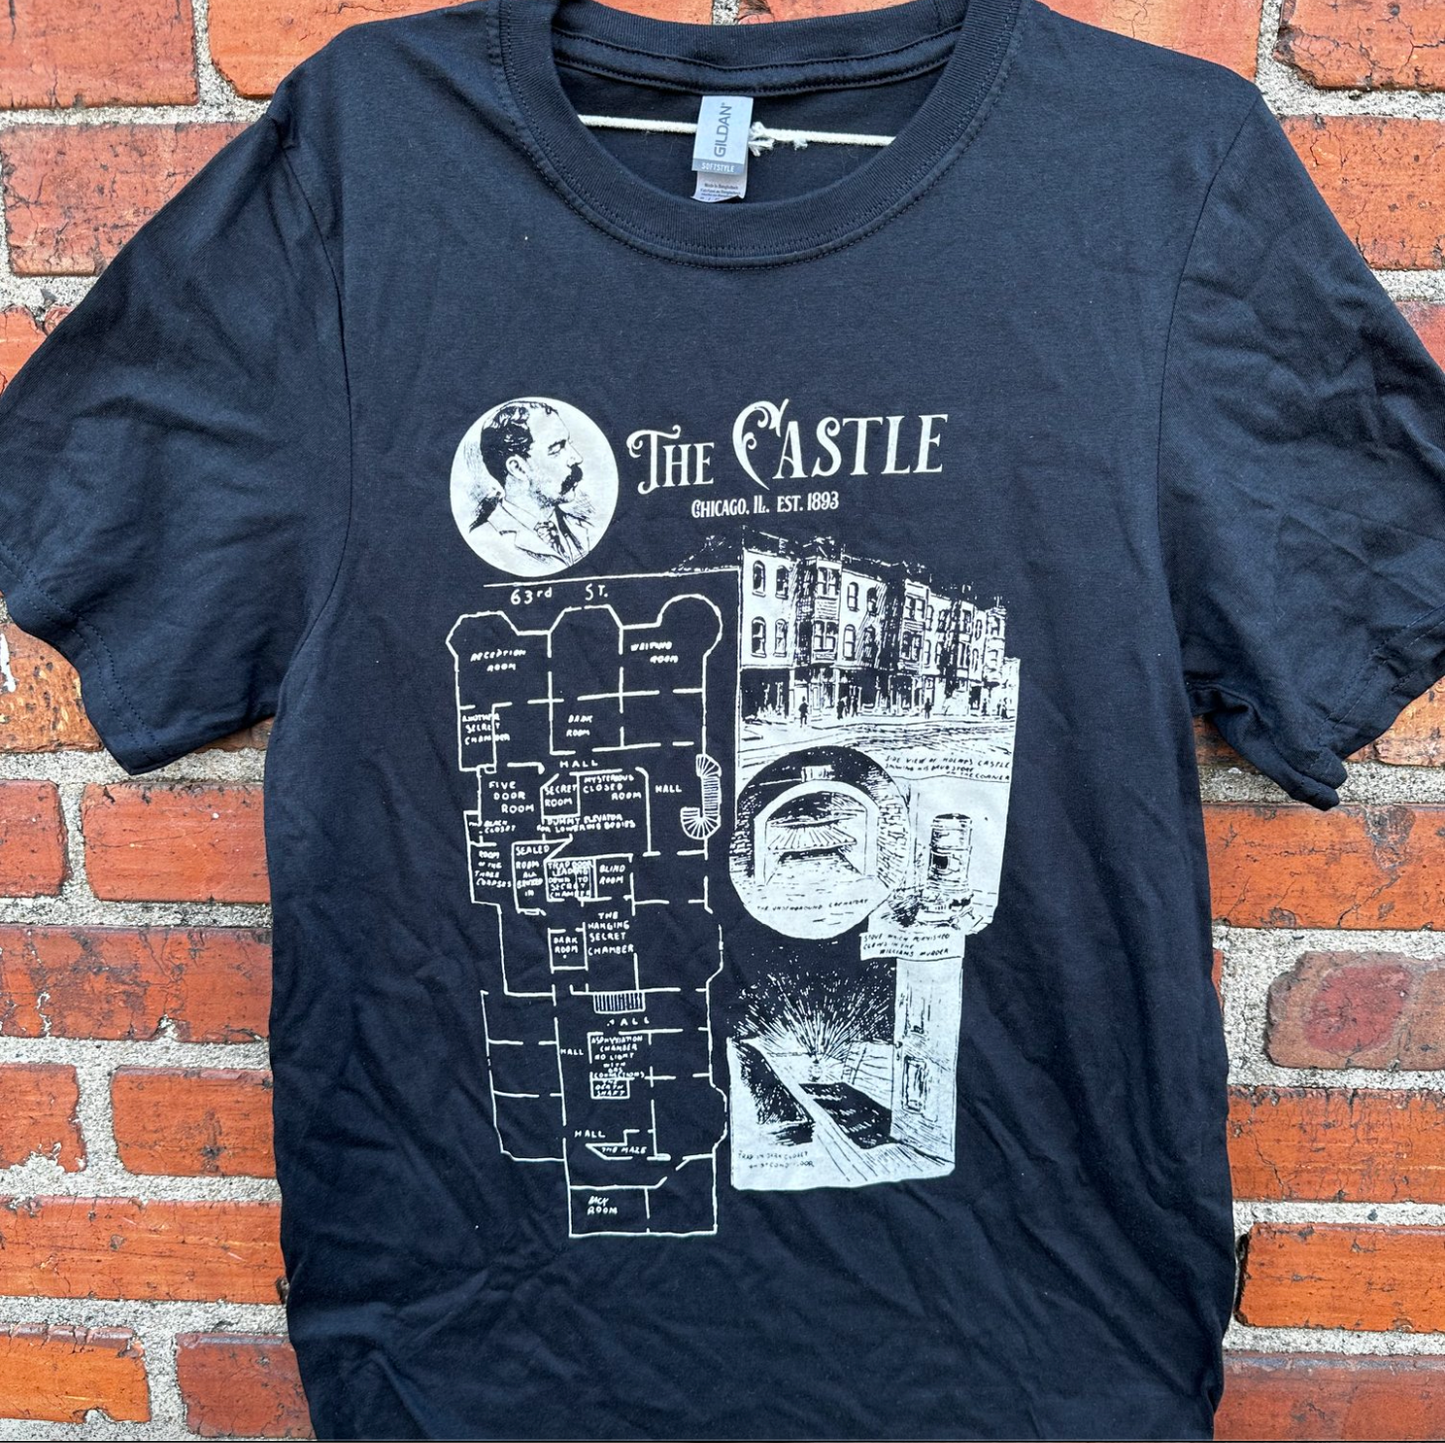 The Marshmallow Ghosts - The Castle shirt